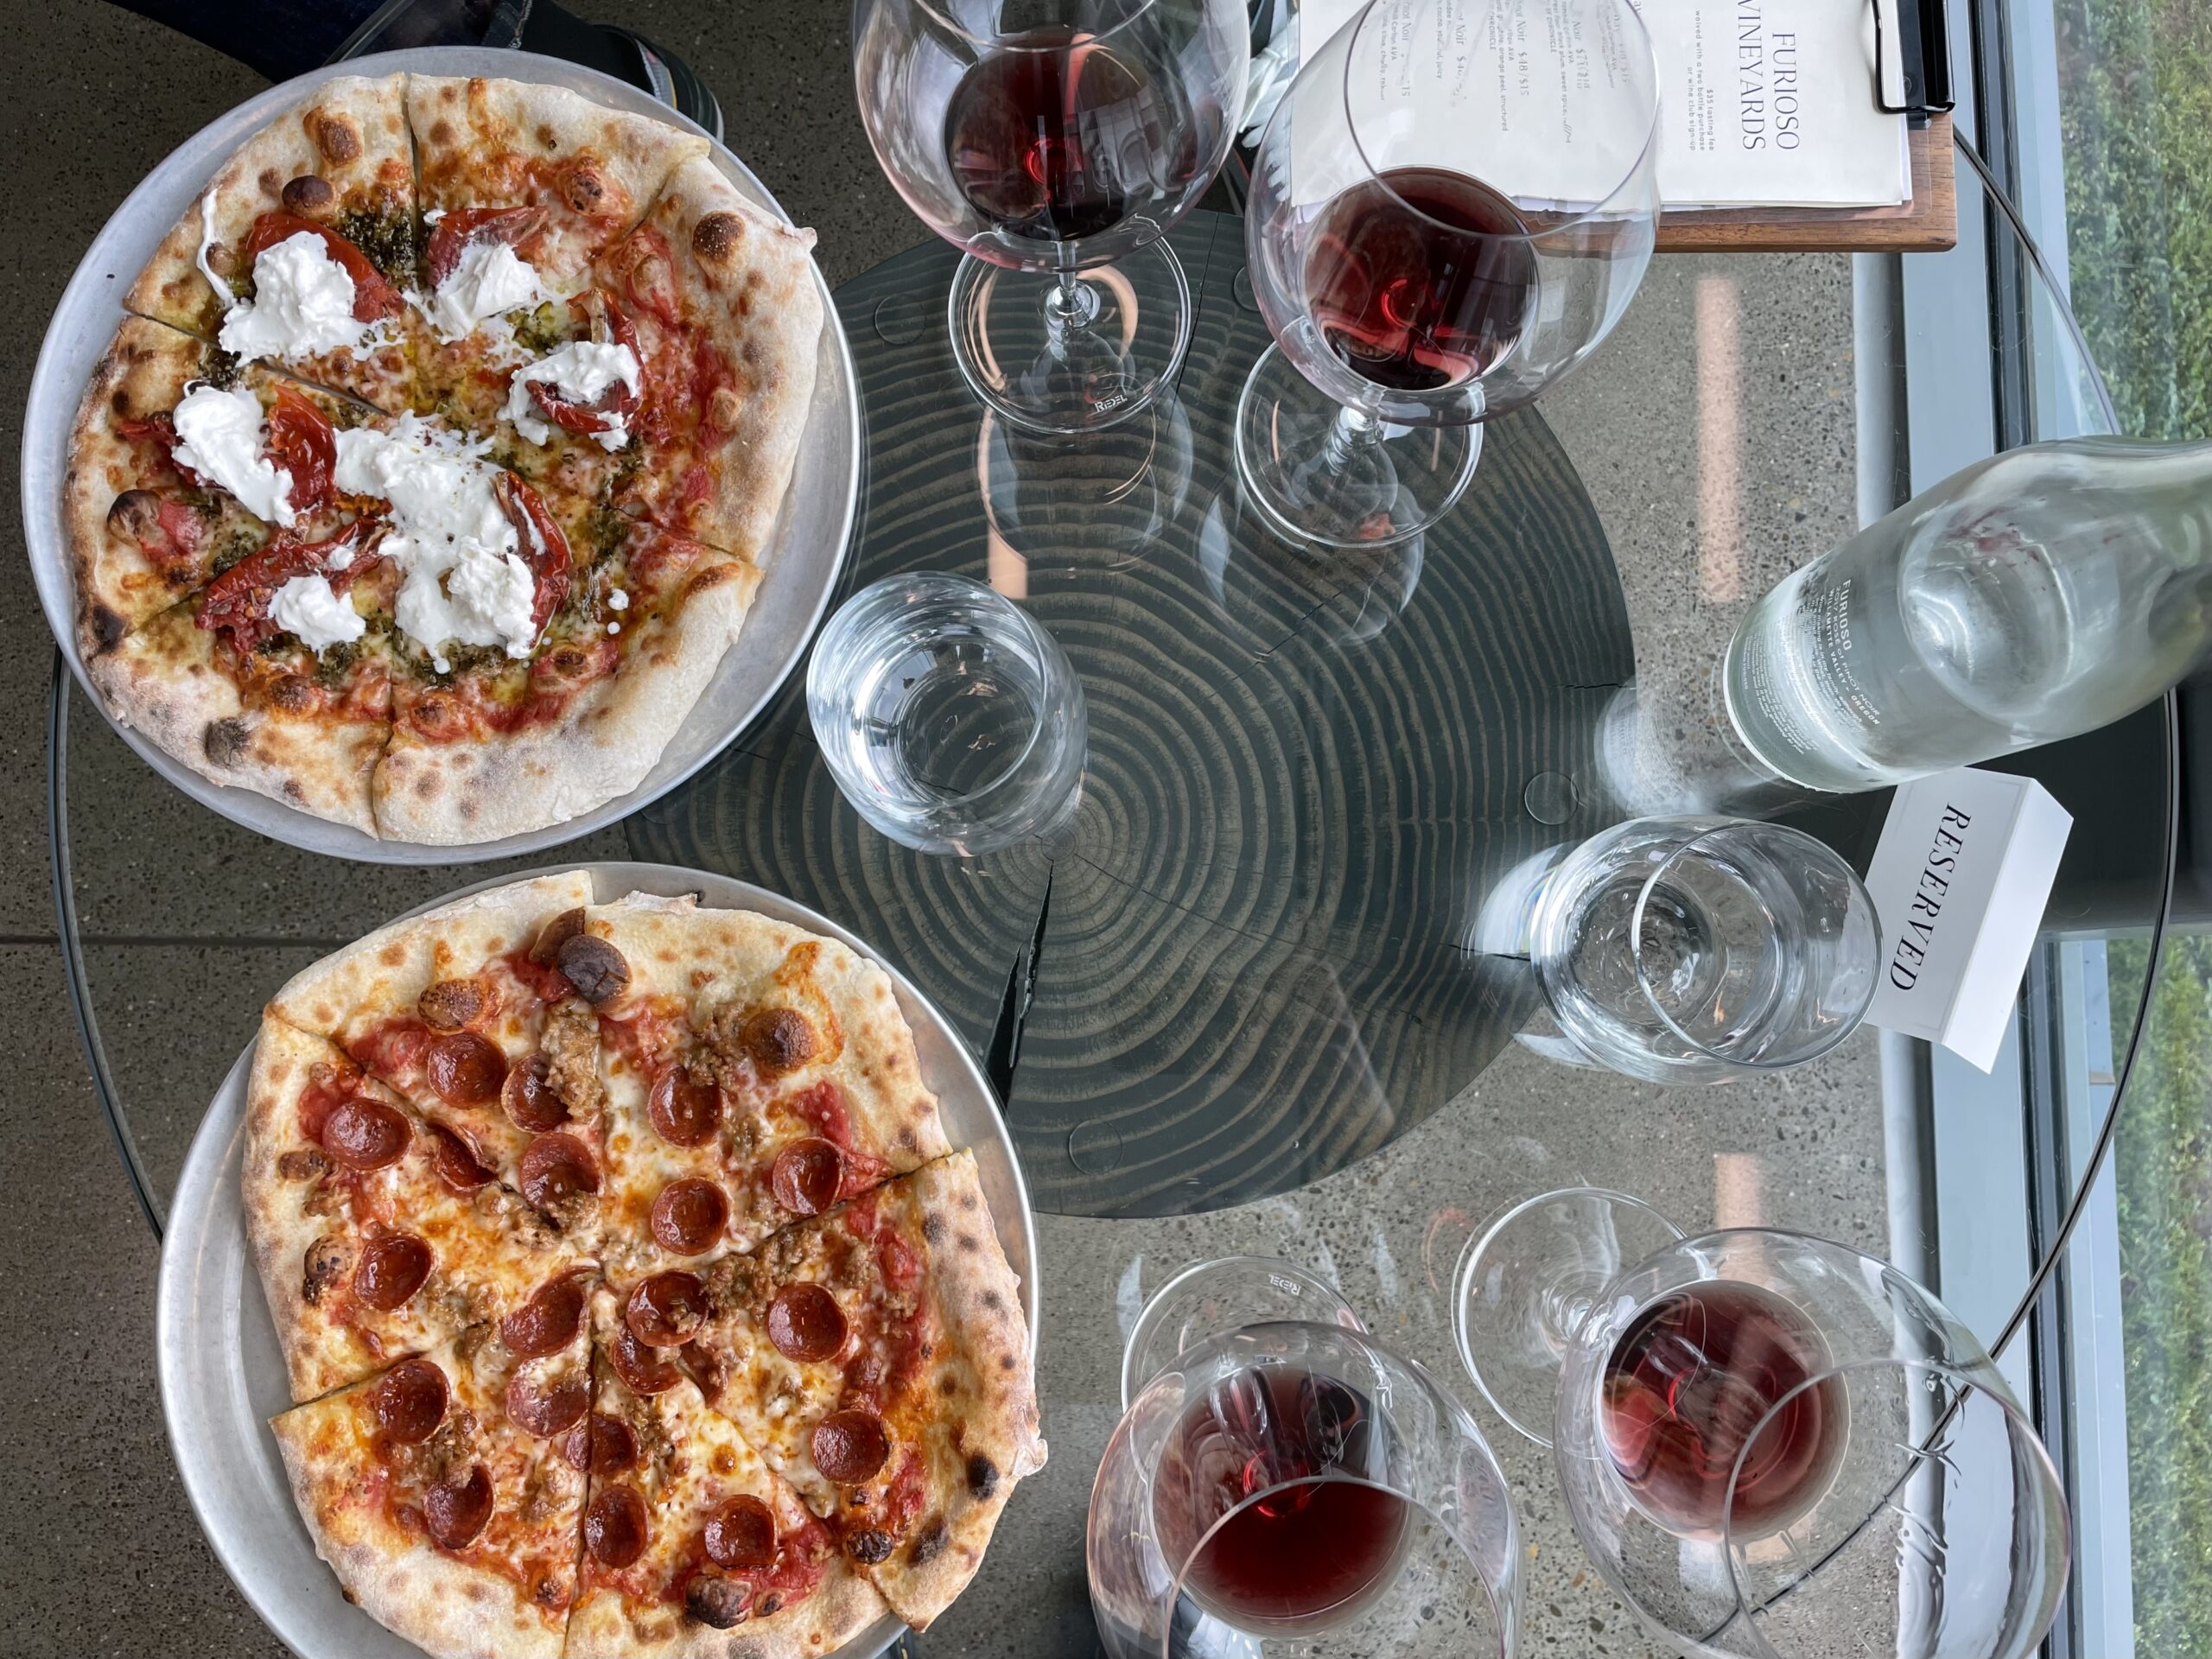 Two pizzas on table with glasses of red wine